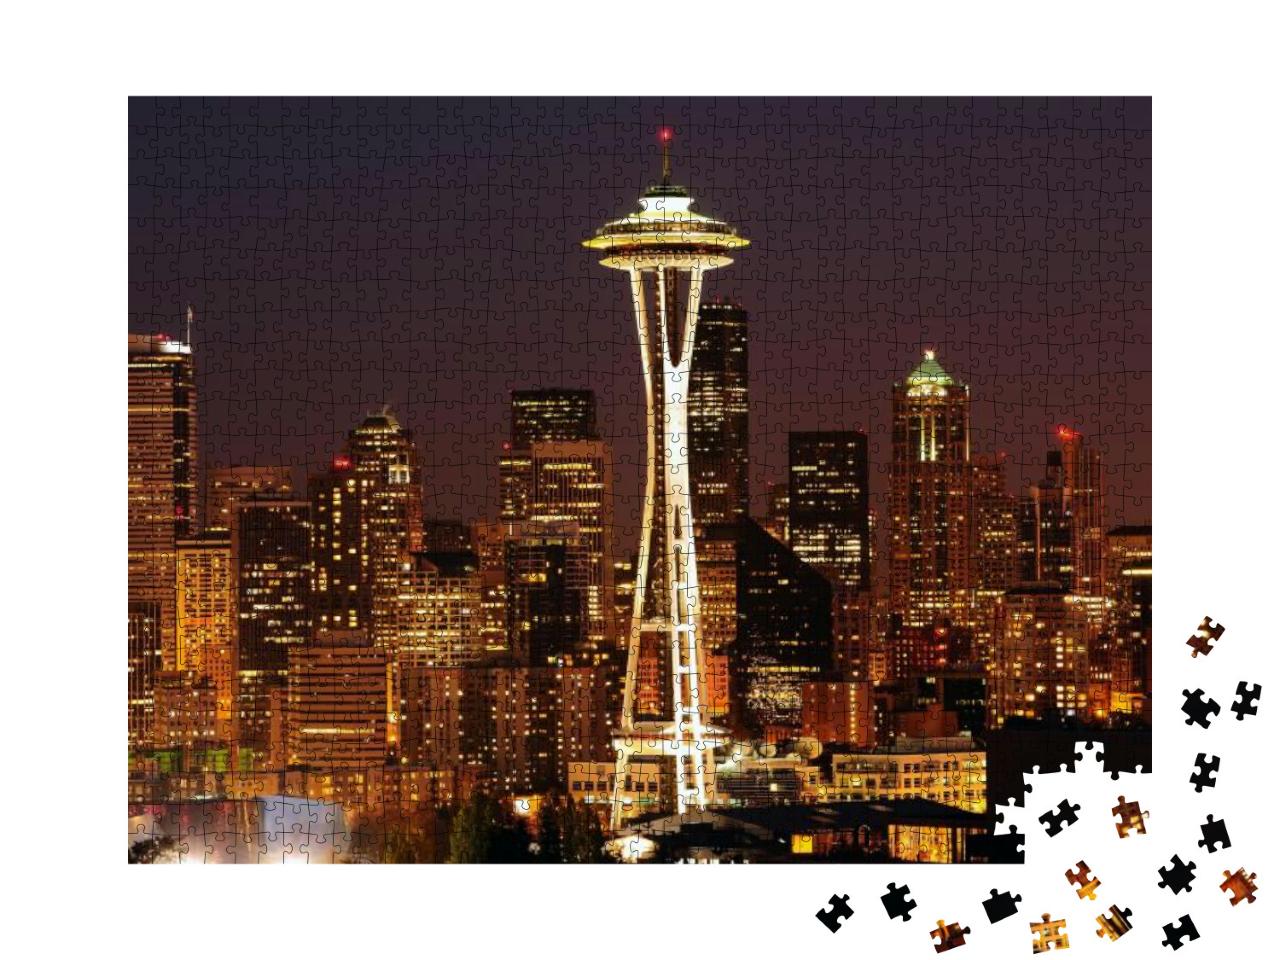 Dazzling Image of the Emerald City of Seattle Skyline At... Jigsaw Puzzle with 1000 pieces